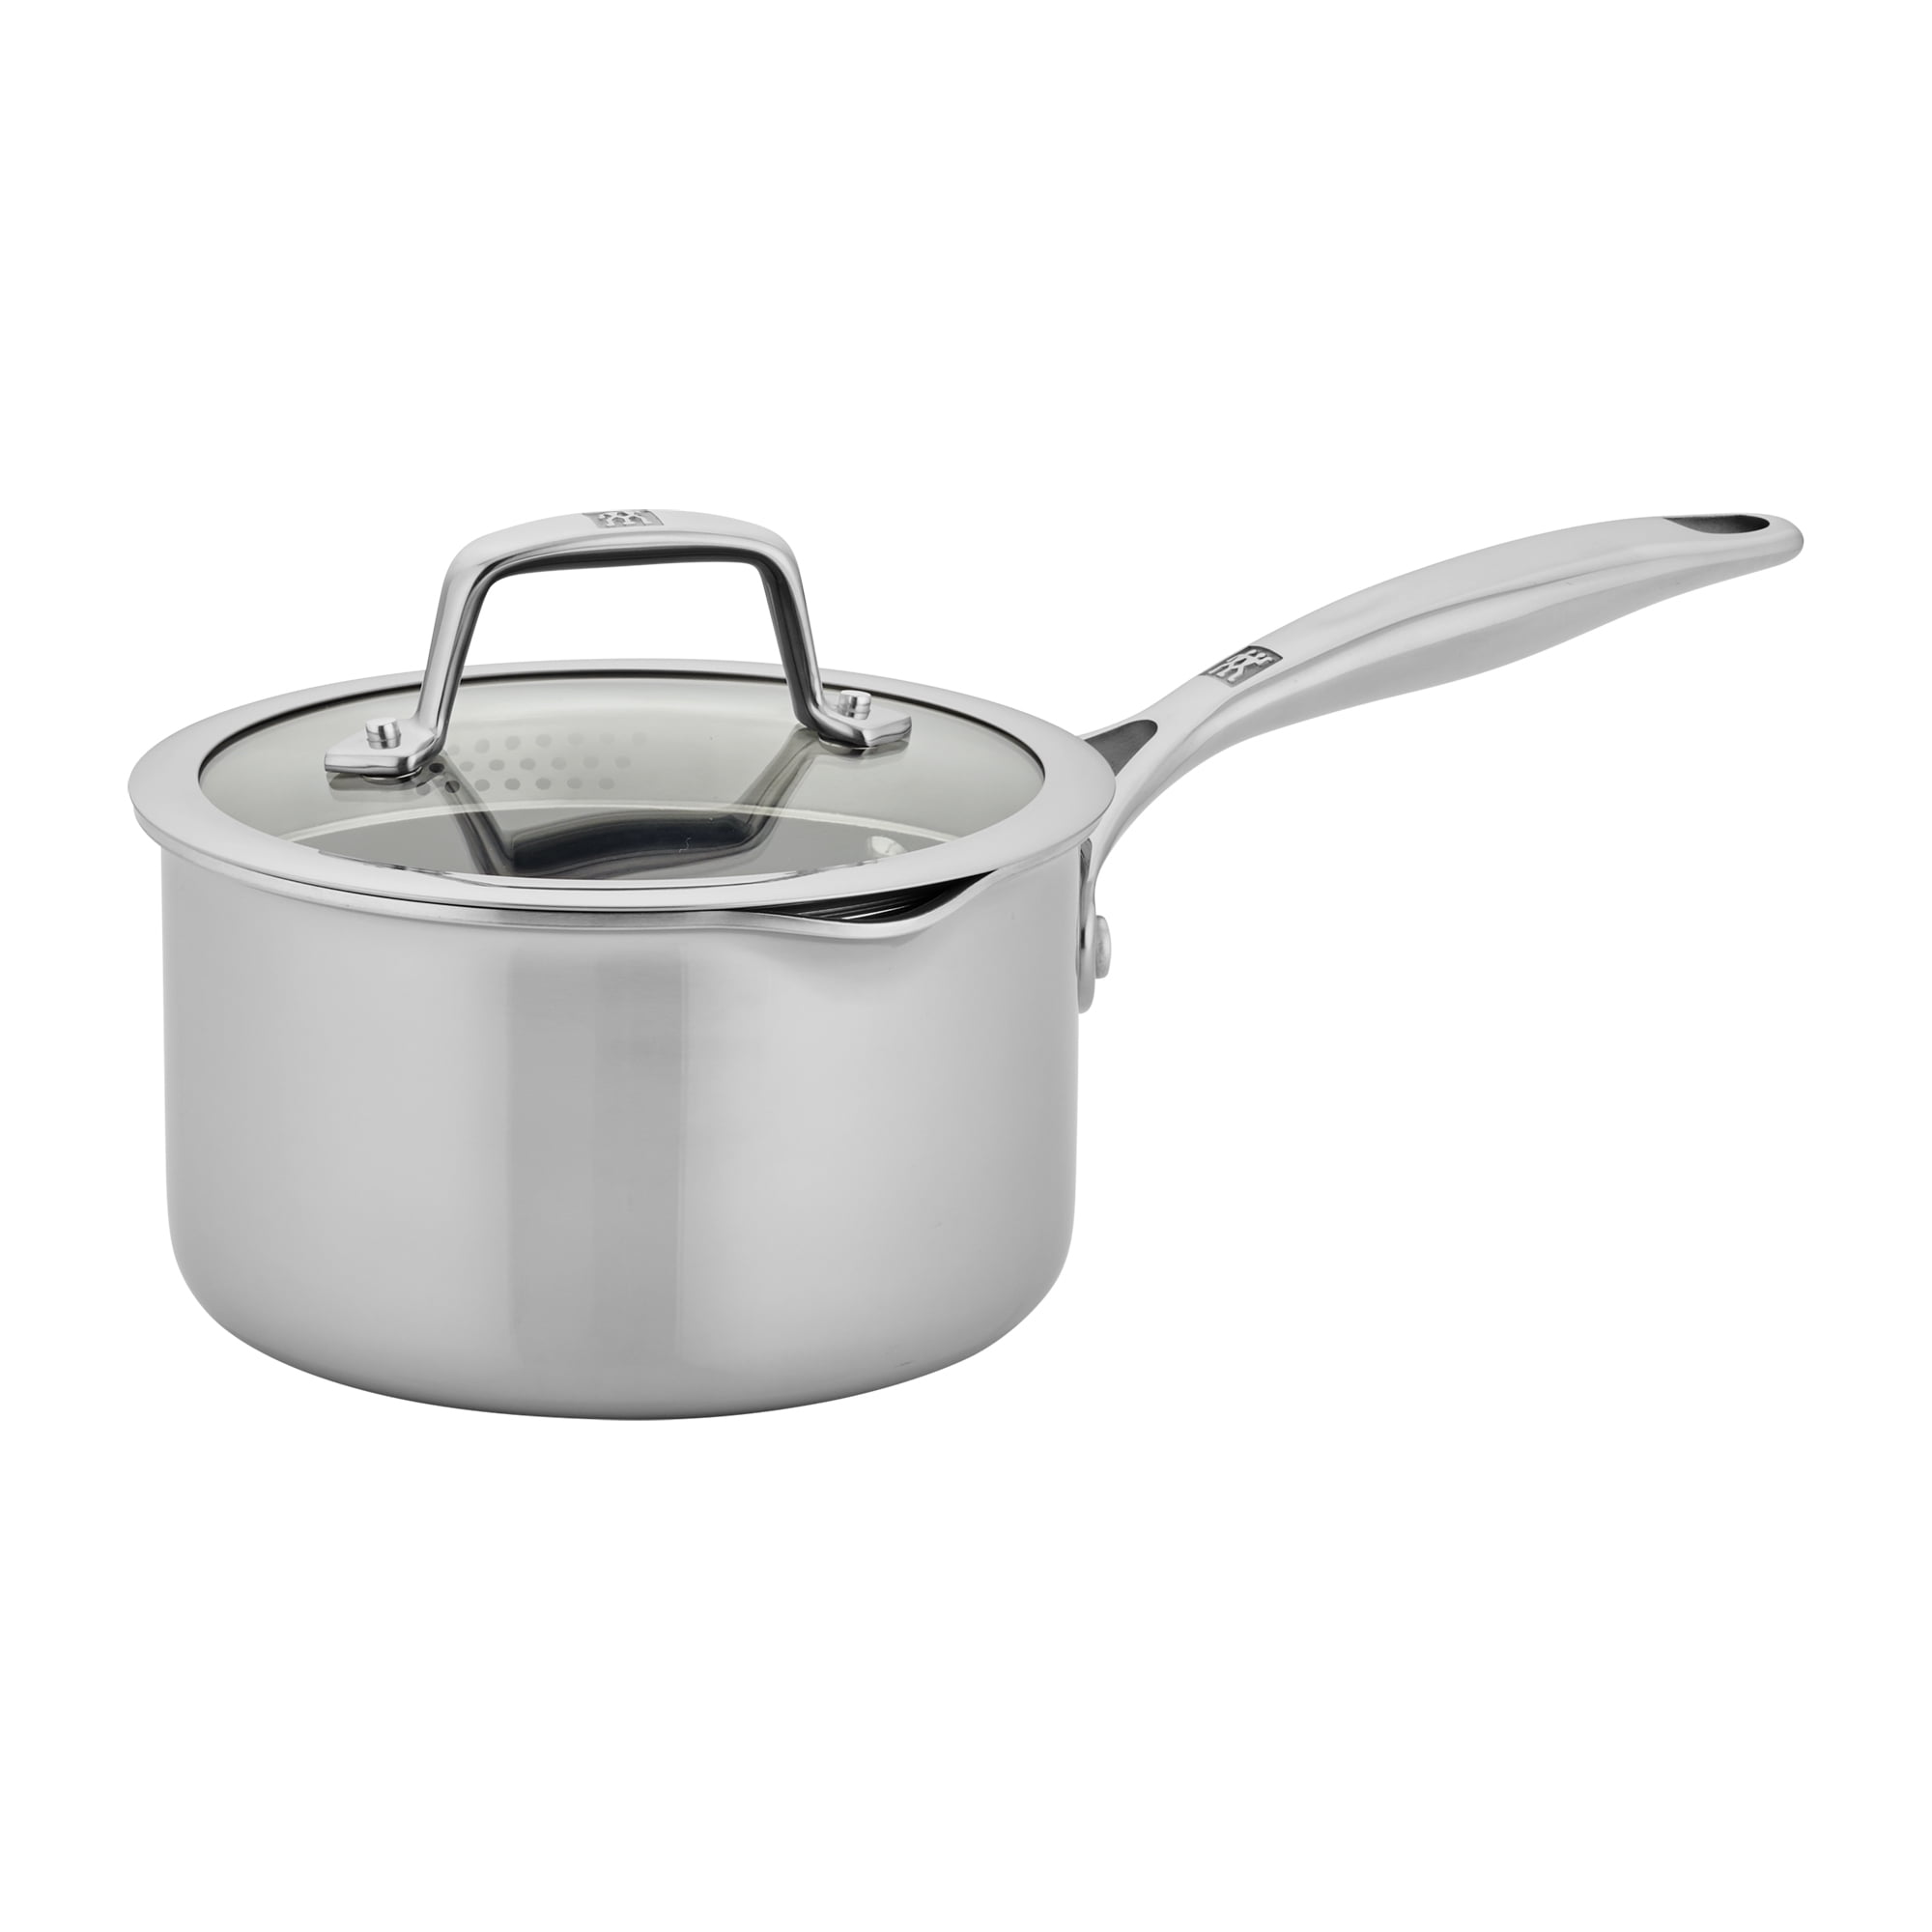 A.B Crew 2.5 Quart Saucepan with Steamer Basket and Oil Drain Rack Nonstick  18/10 Stainless Steel Pot with Glass Lid 2.5 Qt Sauce Pan Small Cooking Pot  Frying Pan for Kitchen Restaurant - Yahoo Shopping